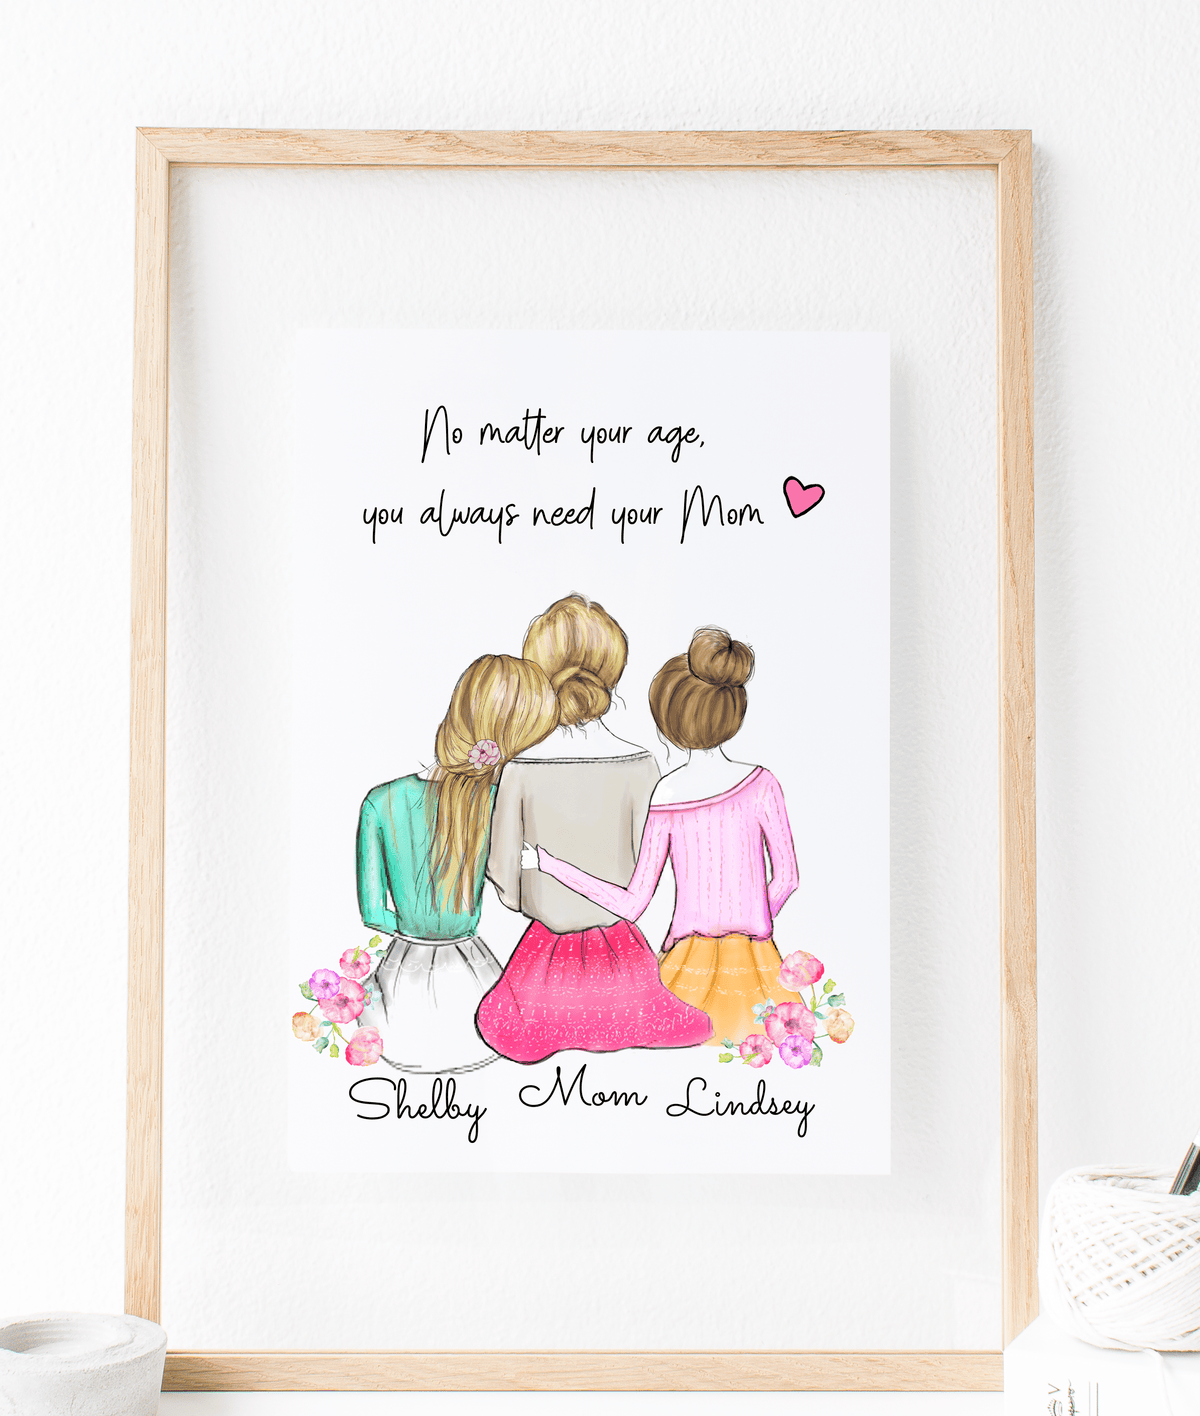 Happy Mothers Day Dog Mom Personalized Gift For Dog Mom I Am Your Friend  Your Partner - Oh Canvas